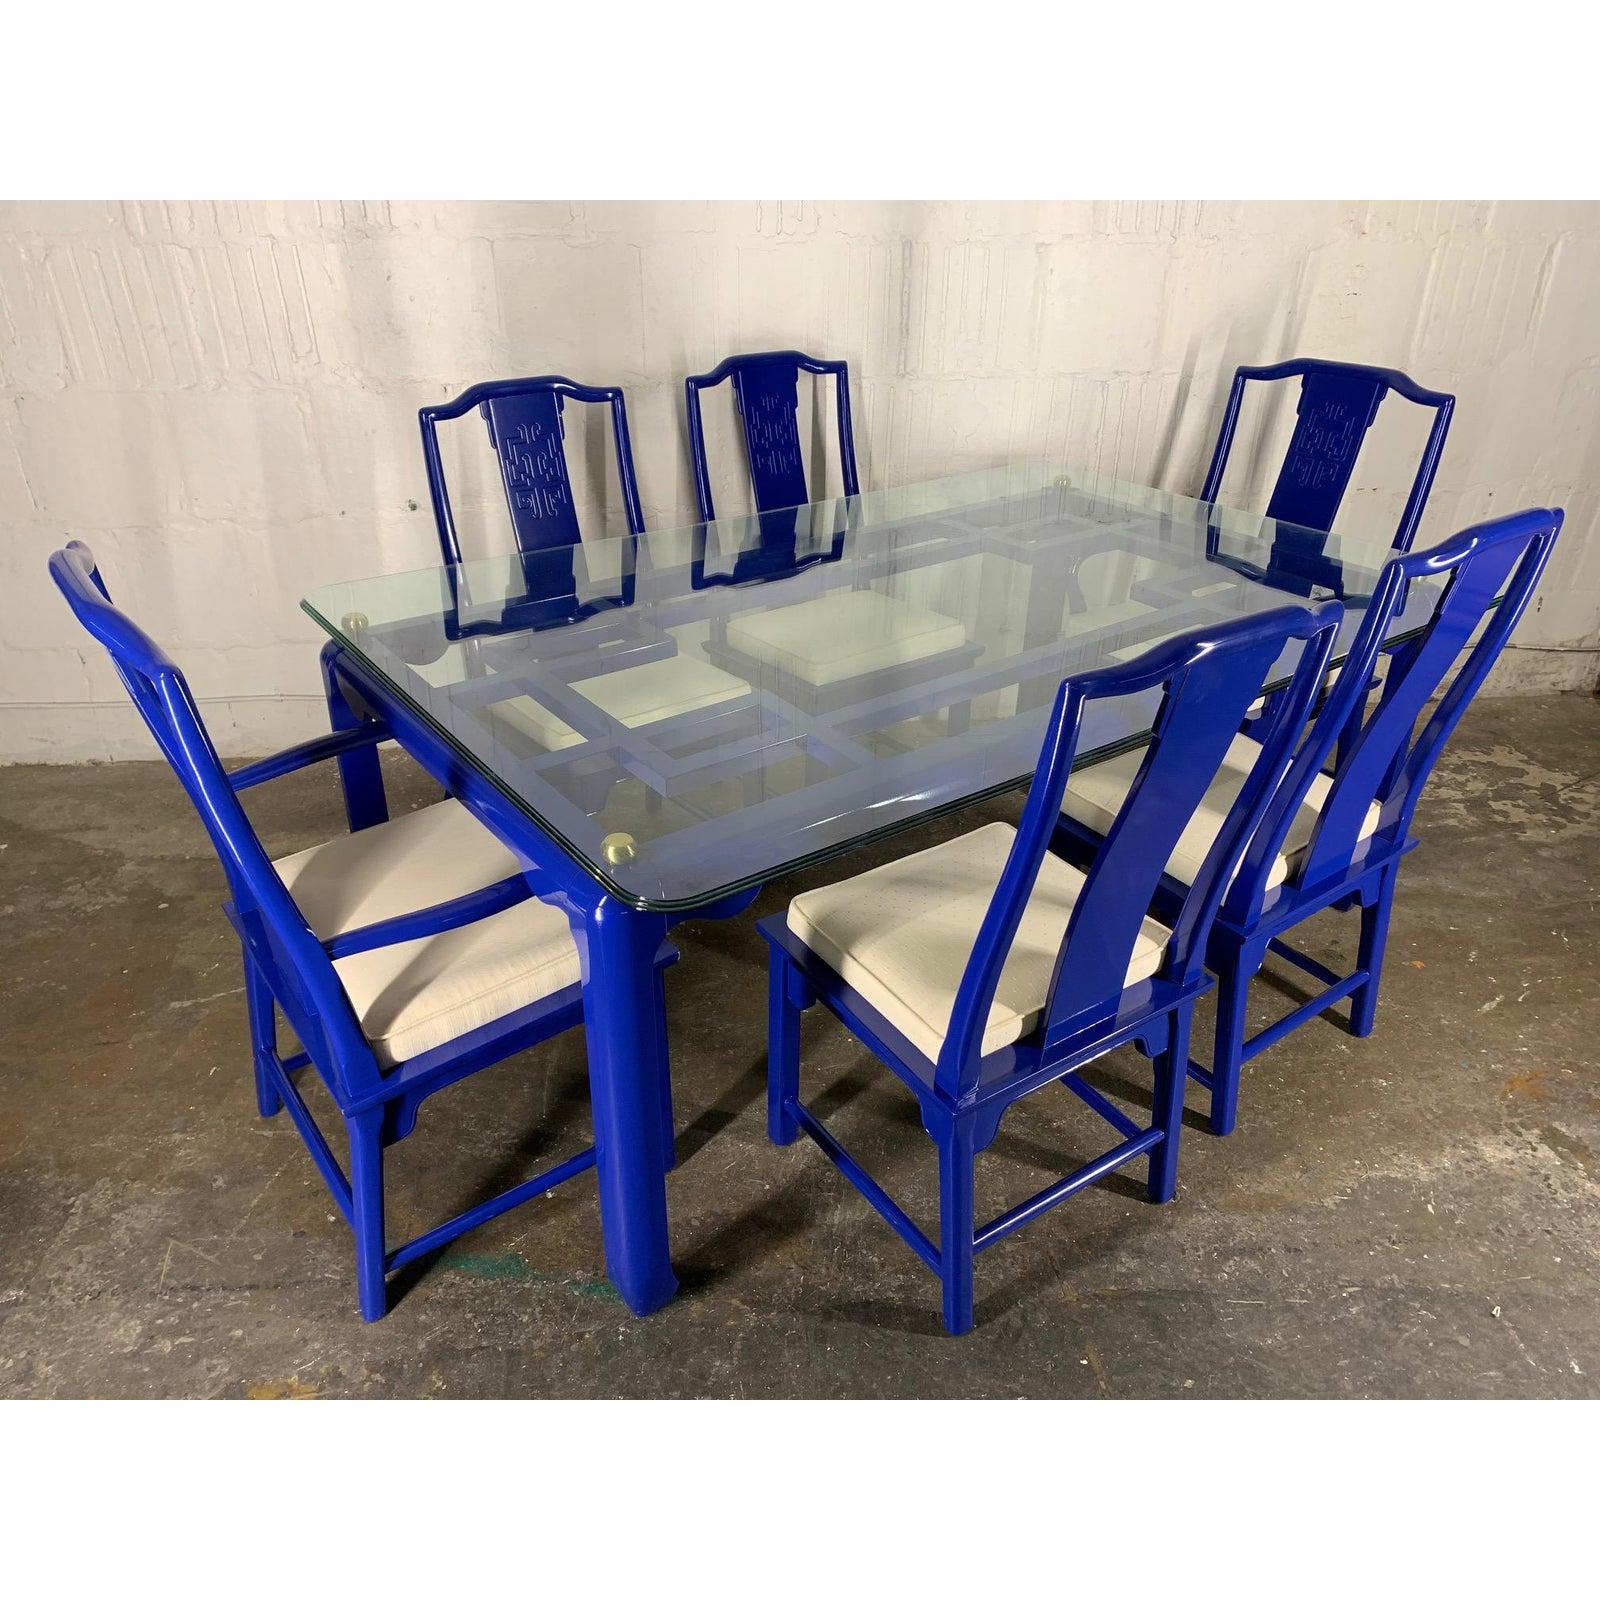 7-piece dining set by Century Furniture. Part of the Chin Hua collection by Raymond Sobota. Asian chinoiserie style newly lacquered in high gloss blue. Original seat upholstery has some slight discolorations. Glass top measures 72